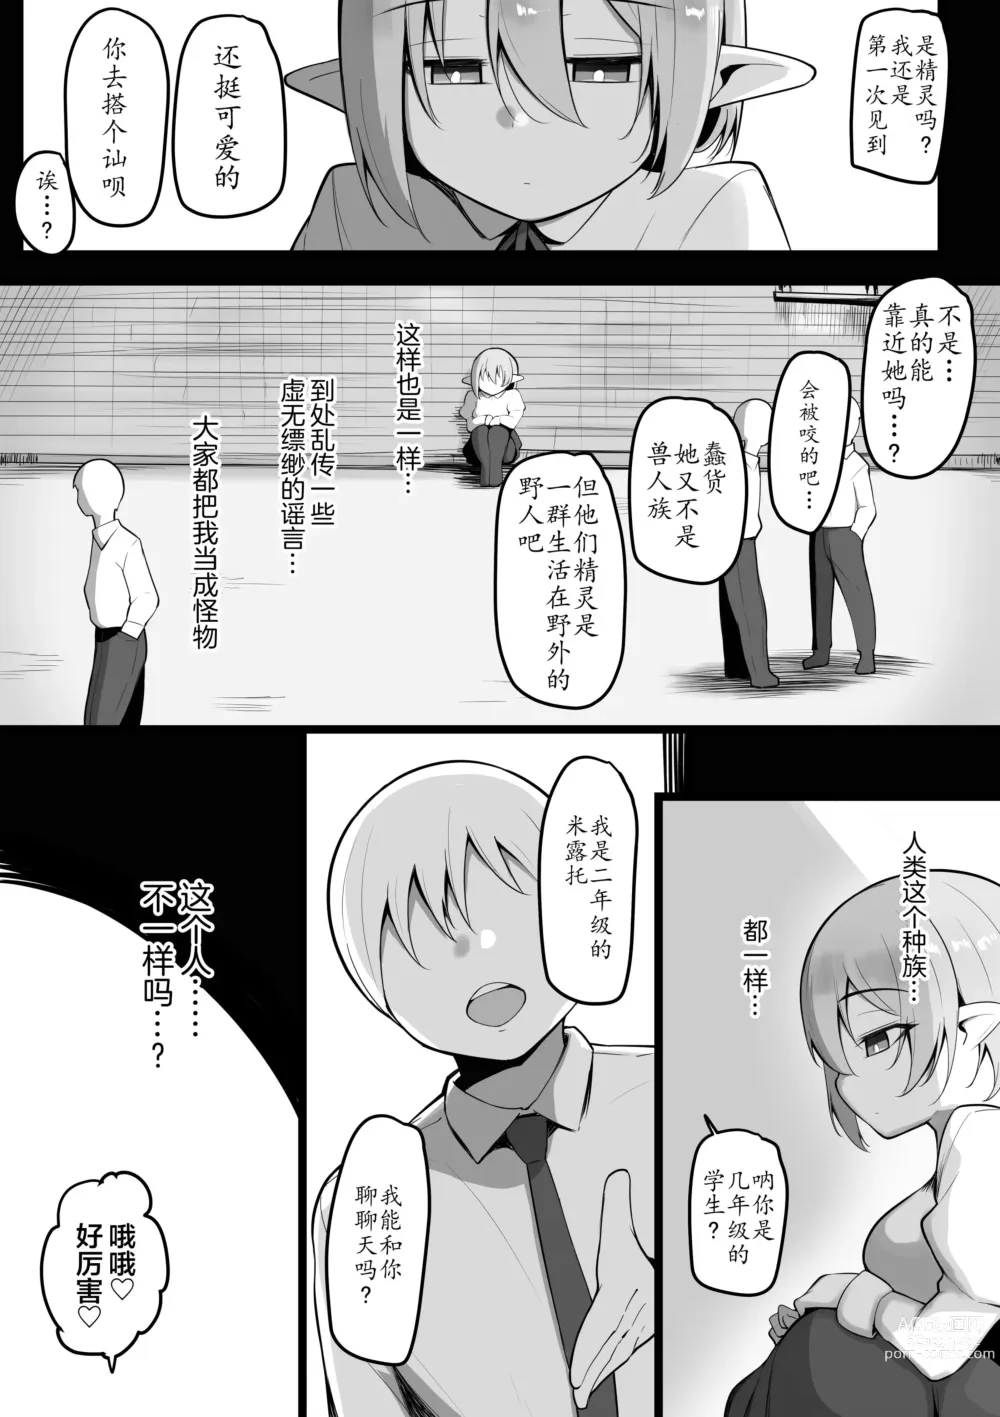 Page 10 of doujinshi NTR Guild